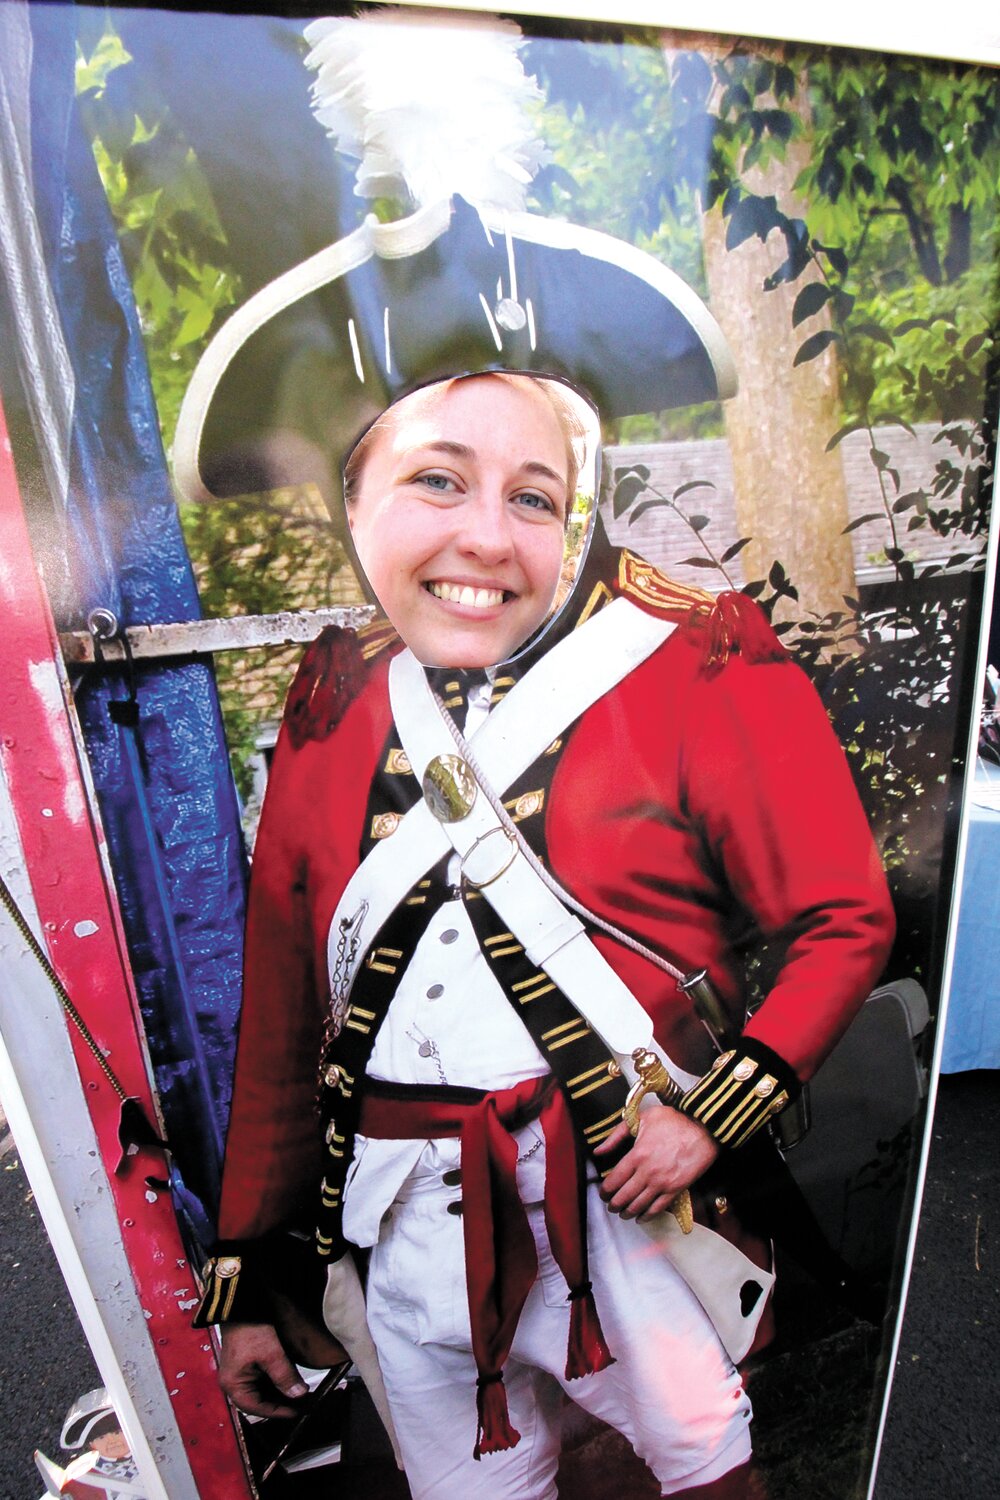 GEARED UP AND READY: Pawtuxet Rangers quartermaster Rachel Sczurek looks from a Rangers cutout that was featured at display. The Rangers have a full slate of activities as the Gaspee Days celebration commemorates wthe 251 anniversary of the British ship as she was fast aground on the shoals of Namquid Point, now Gaspee Point.